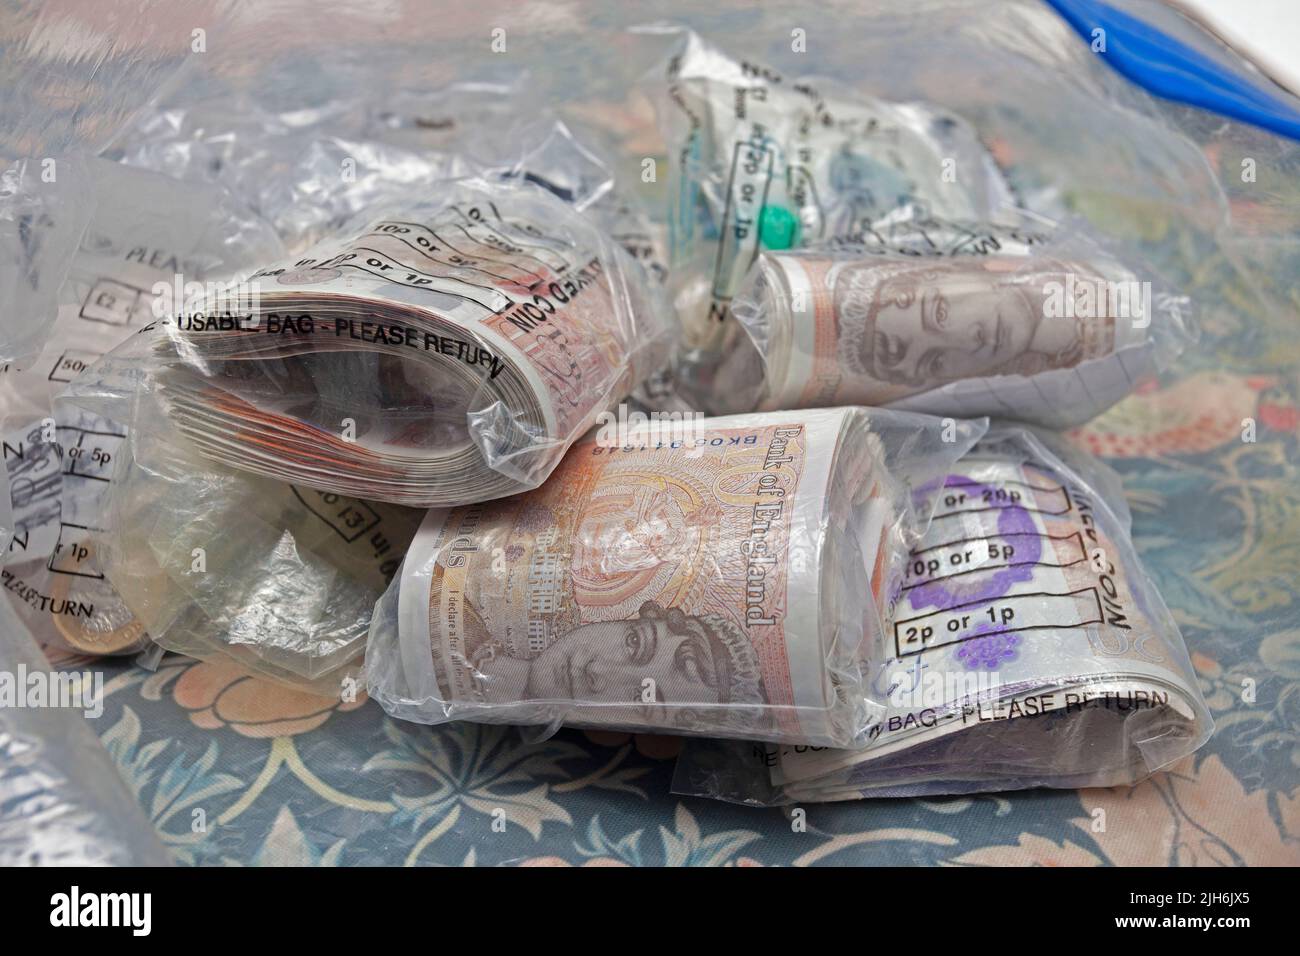 British bank notes in clear bags Stock Photo